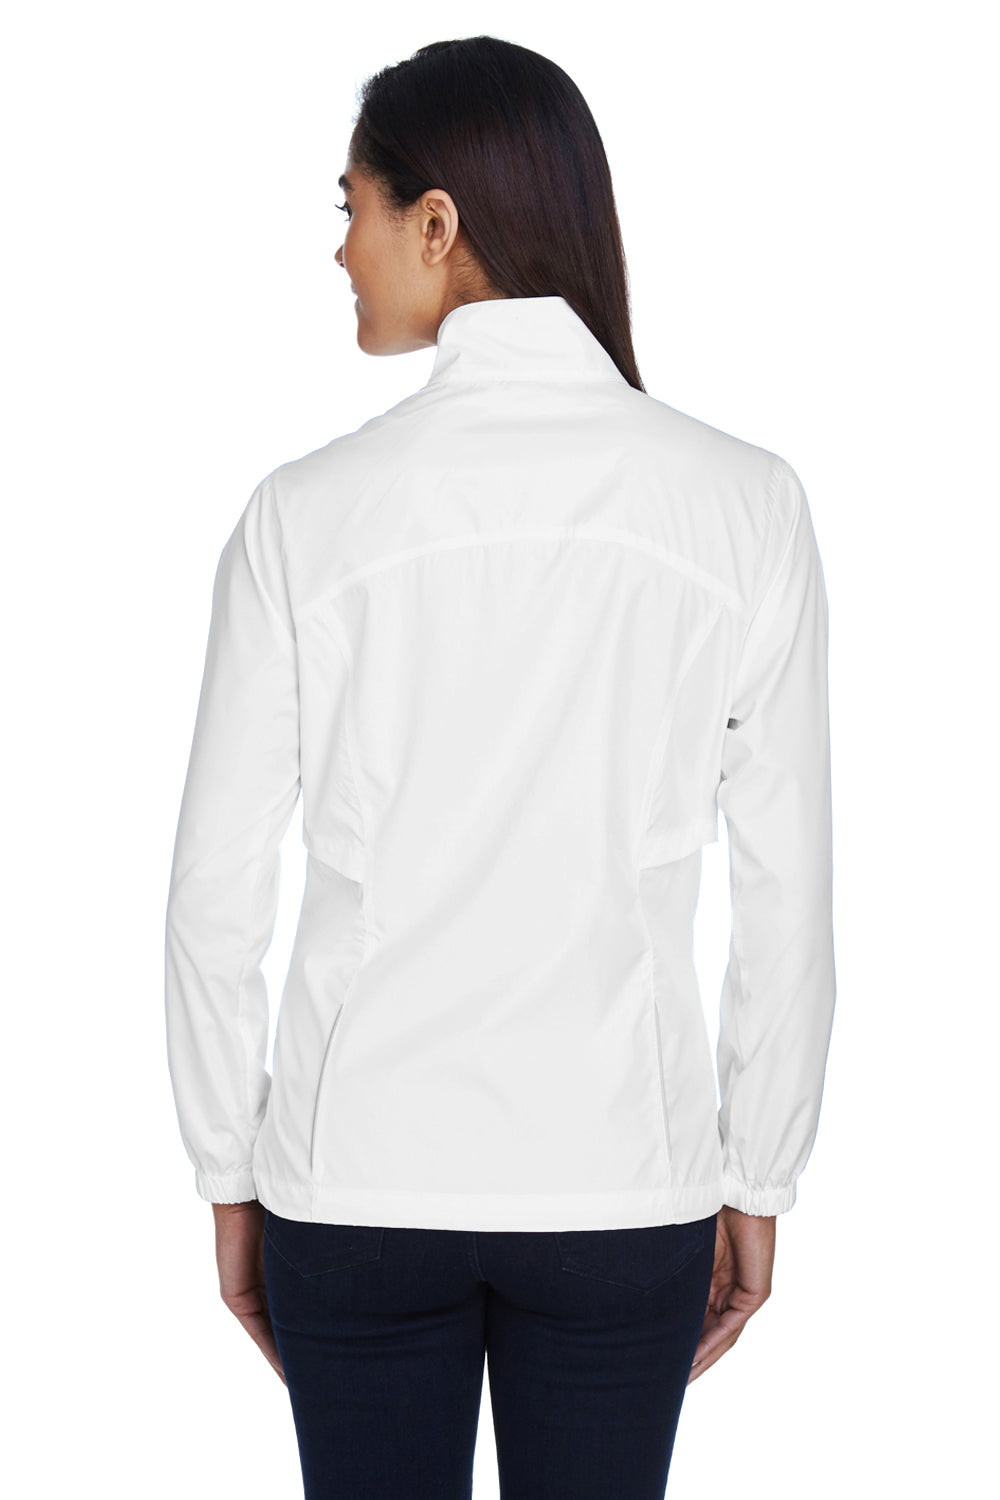 Core 365 78183 Womens Motivate Water Resistant Full Zip Jacket White Back